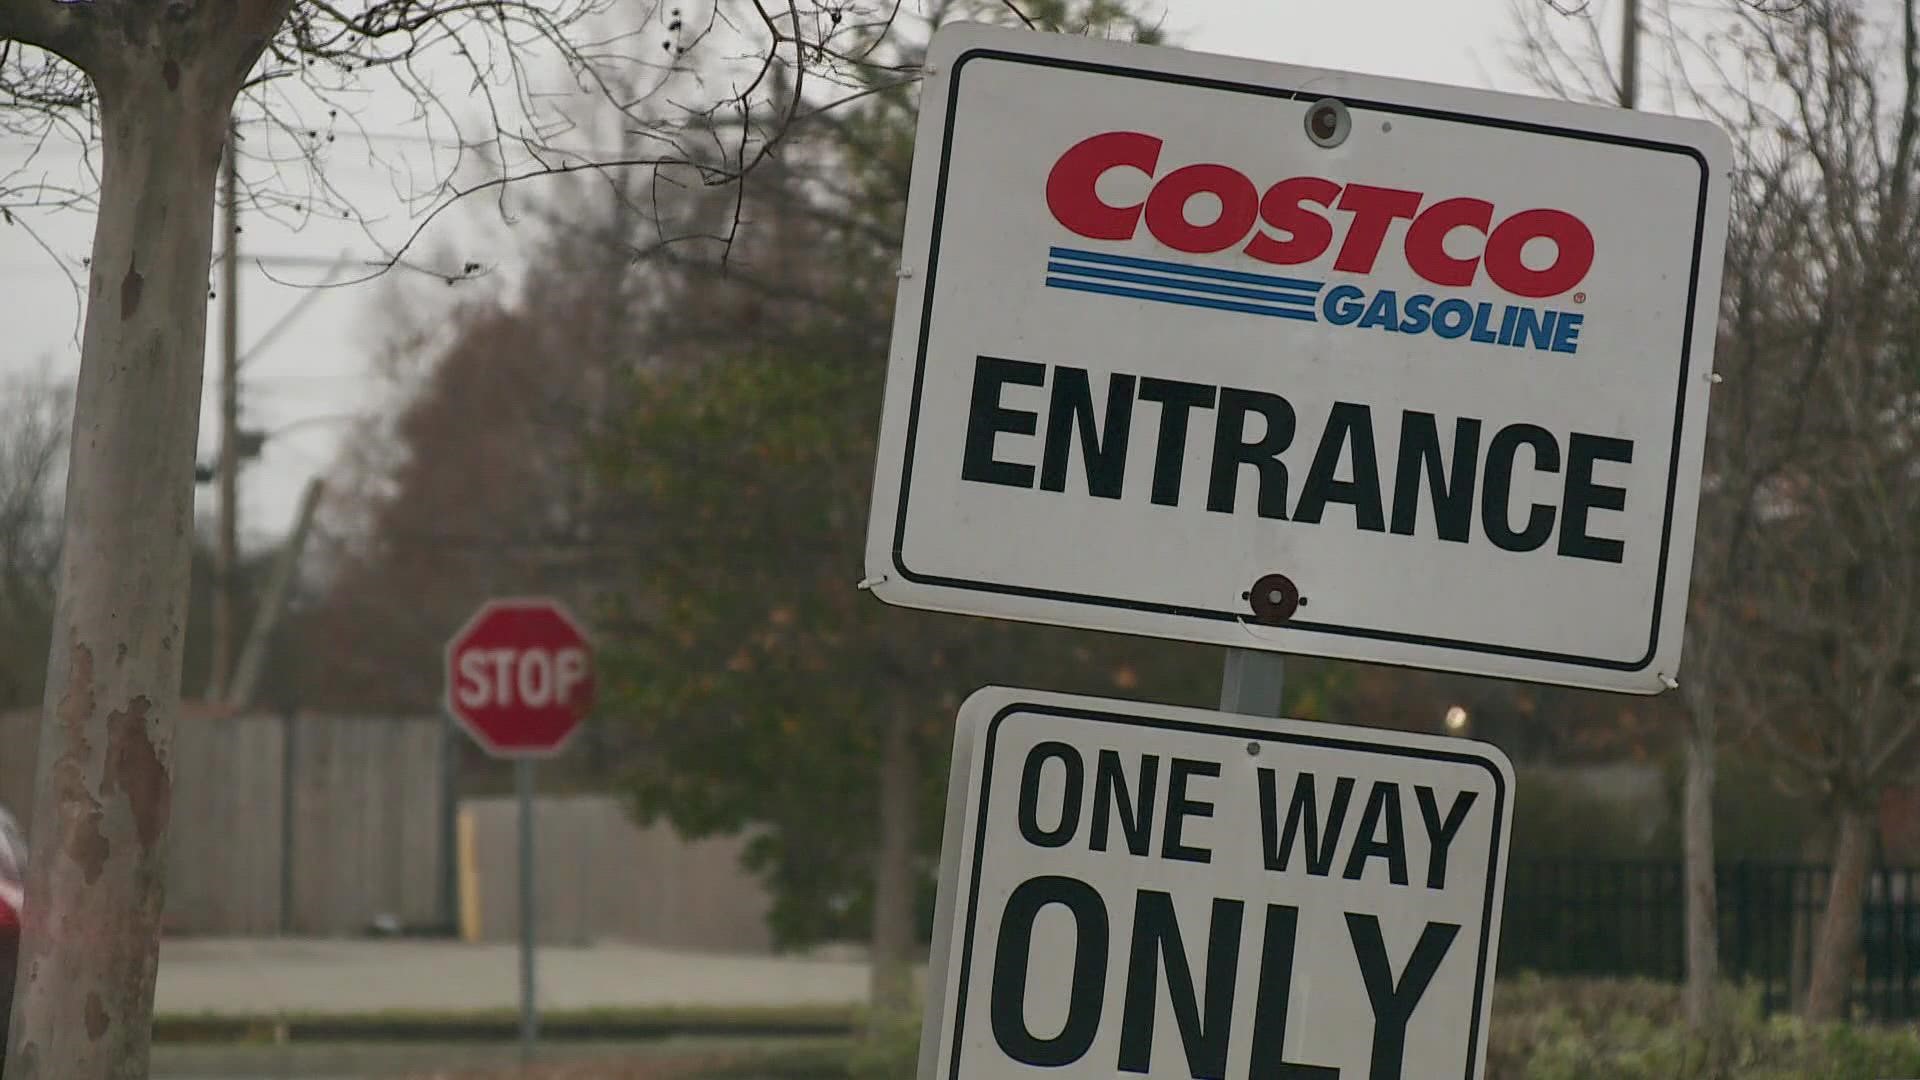 The lawsuit contends Costco's owners and managers didn't do enough to protect customers after a string of carjackings at the store.